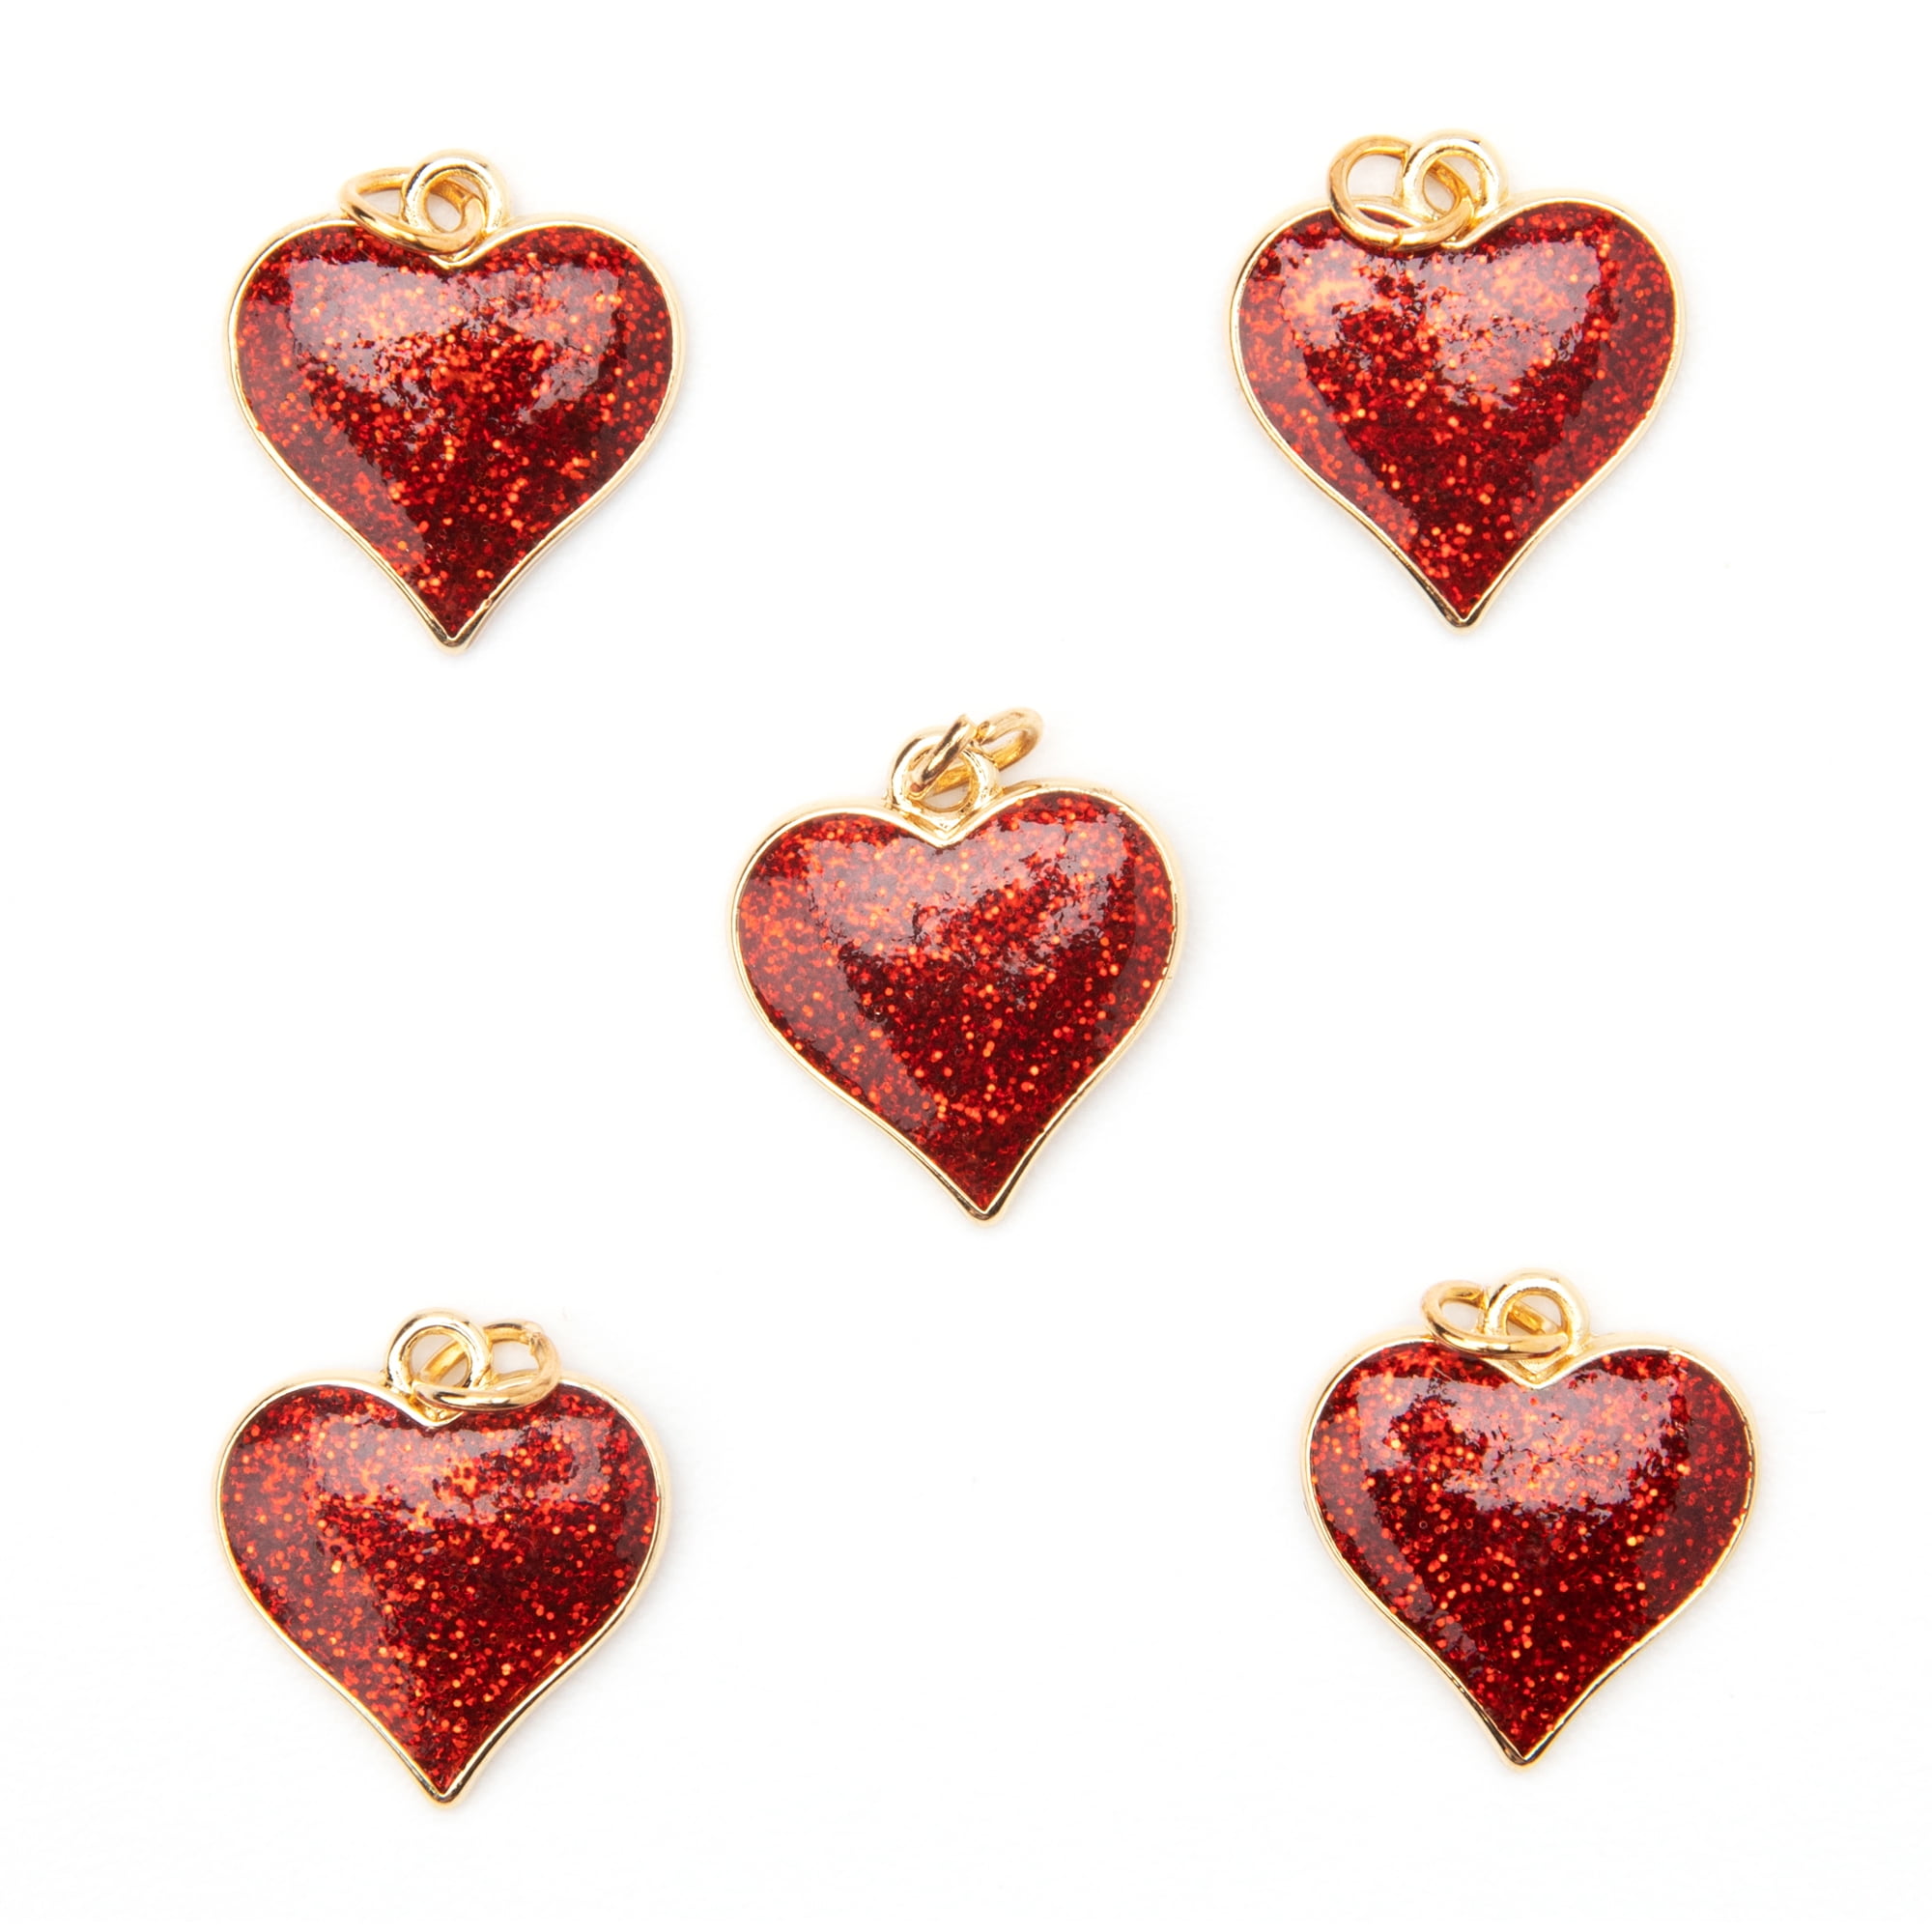 jewelry for women 30 PC Heart Shape Charms Bling Charms For